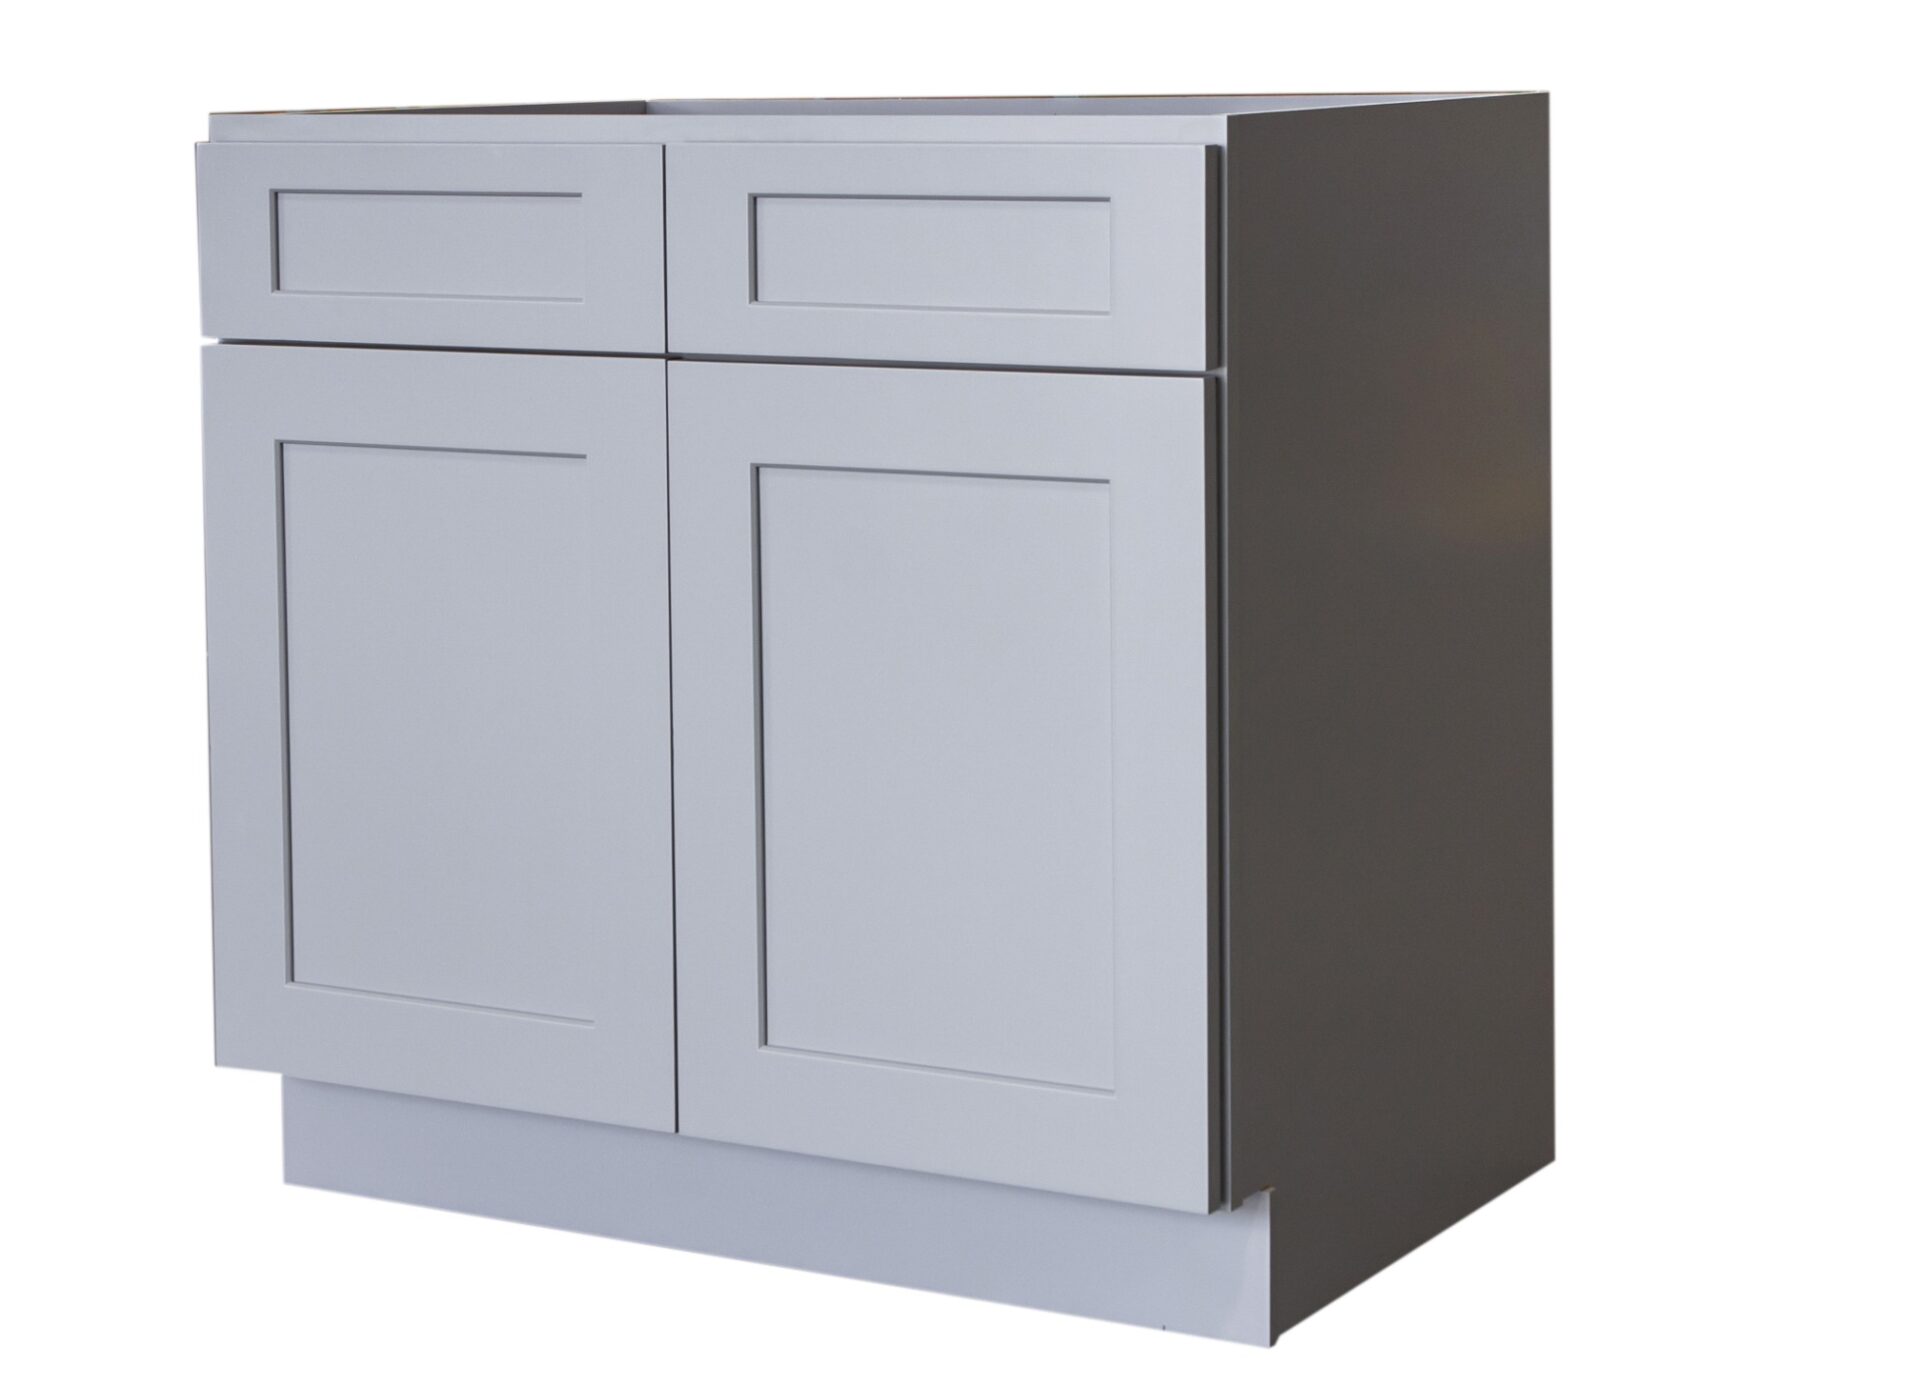 Base Cabinet - Double Door and Double Drawer - GREY SHAKER - Cabinet Deals